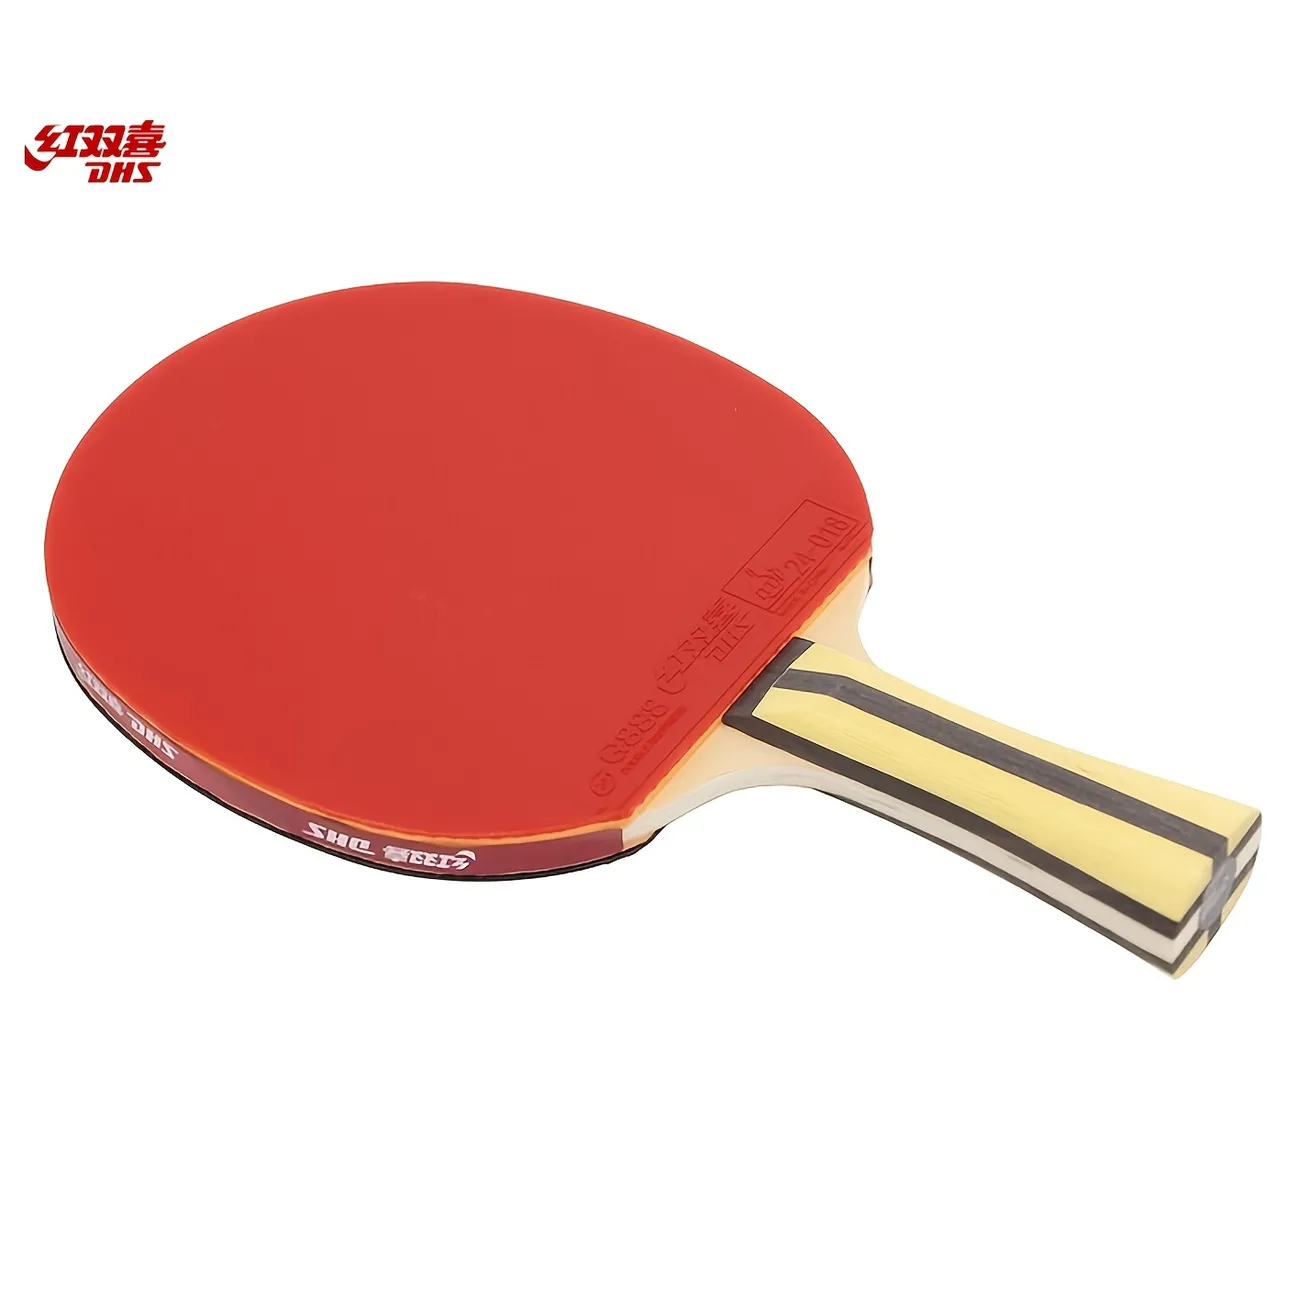 Compete At Your Best Dhs 4 Stars Double Sided Reverse Rubber Table Tennis Racket For Competition Training